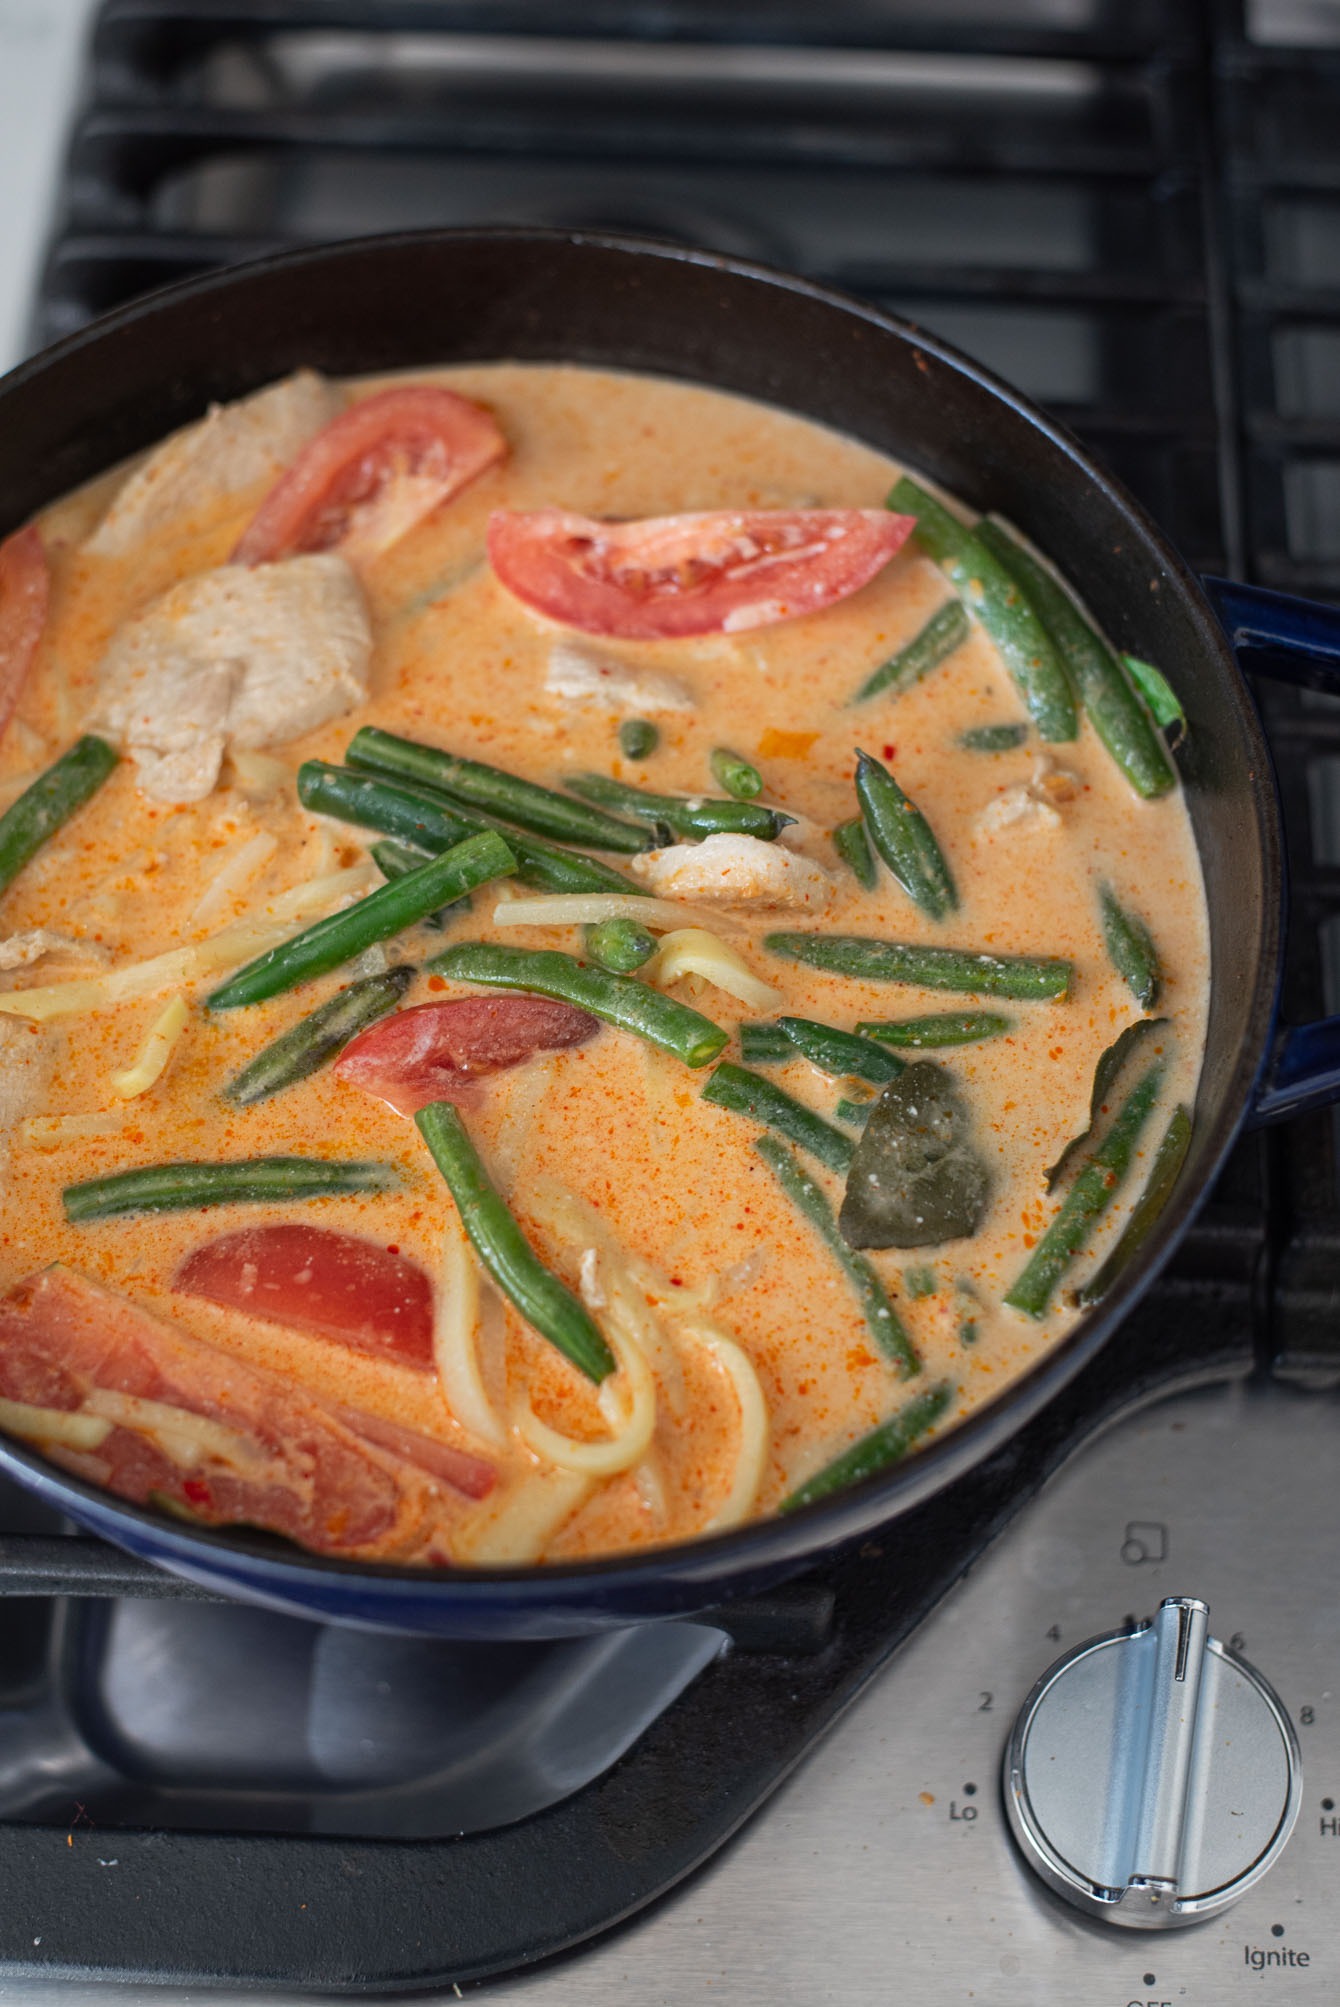 Coconut milk added to Thai red curry chicken and vegetables in a pot.